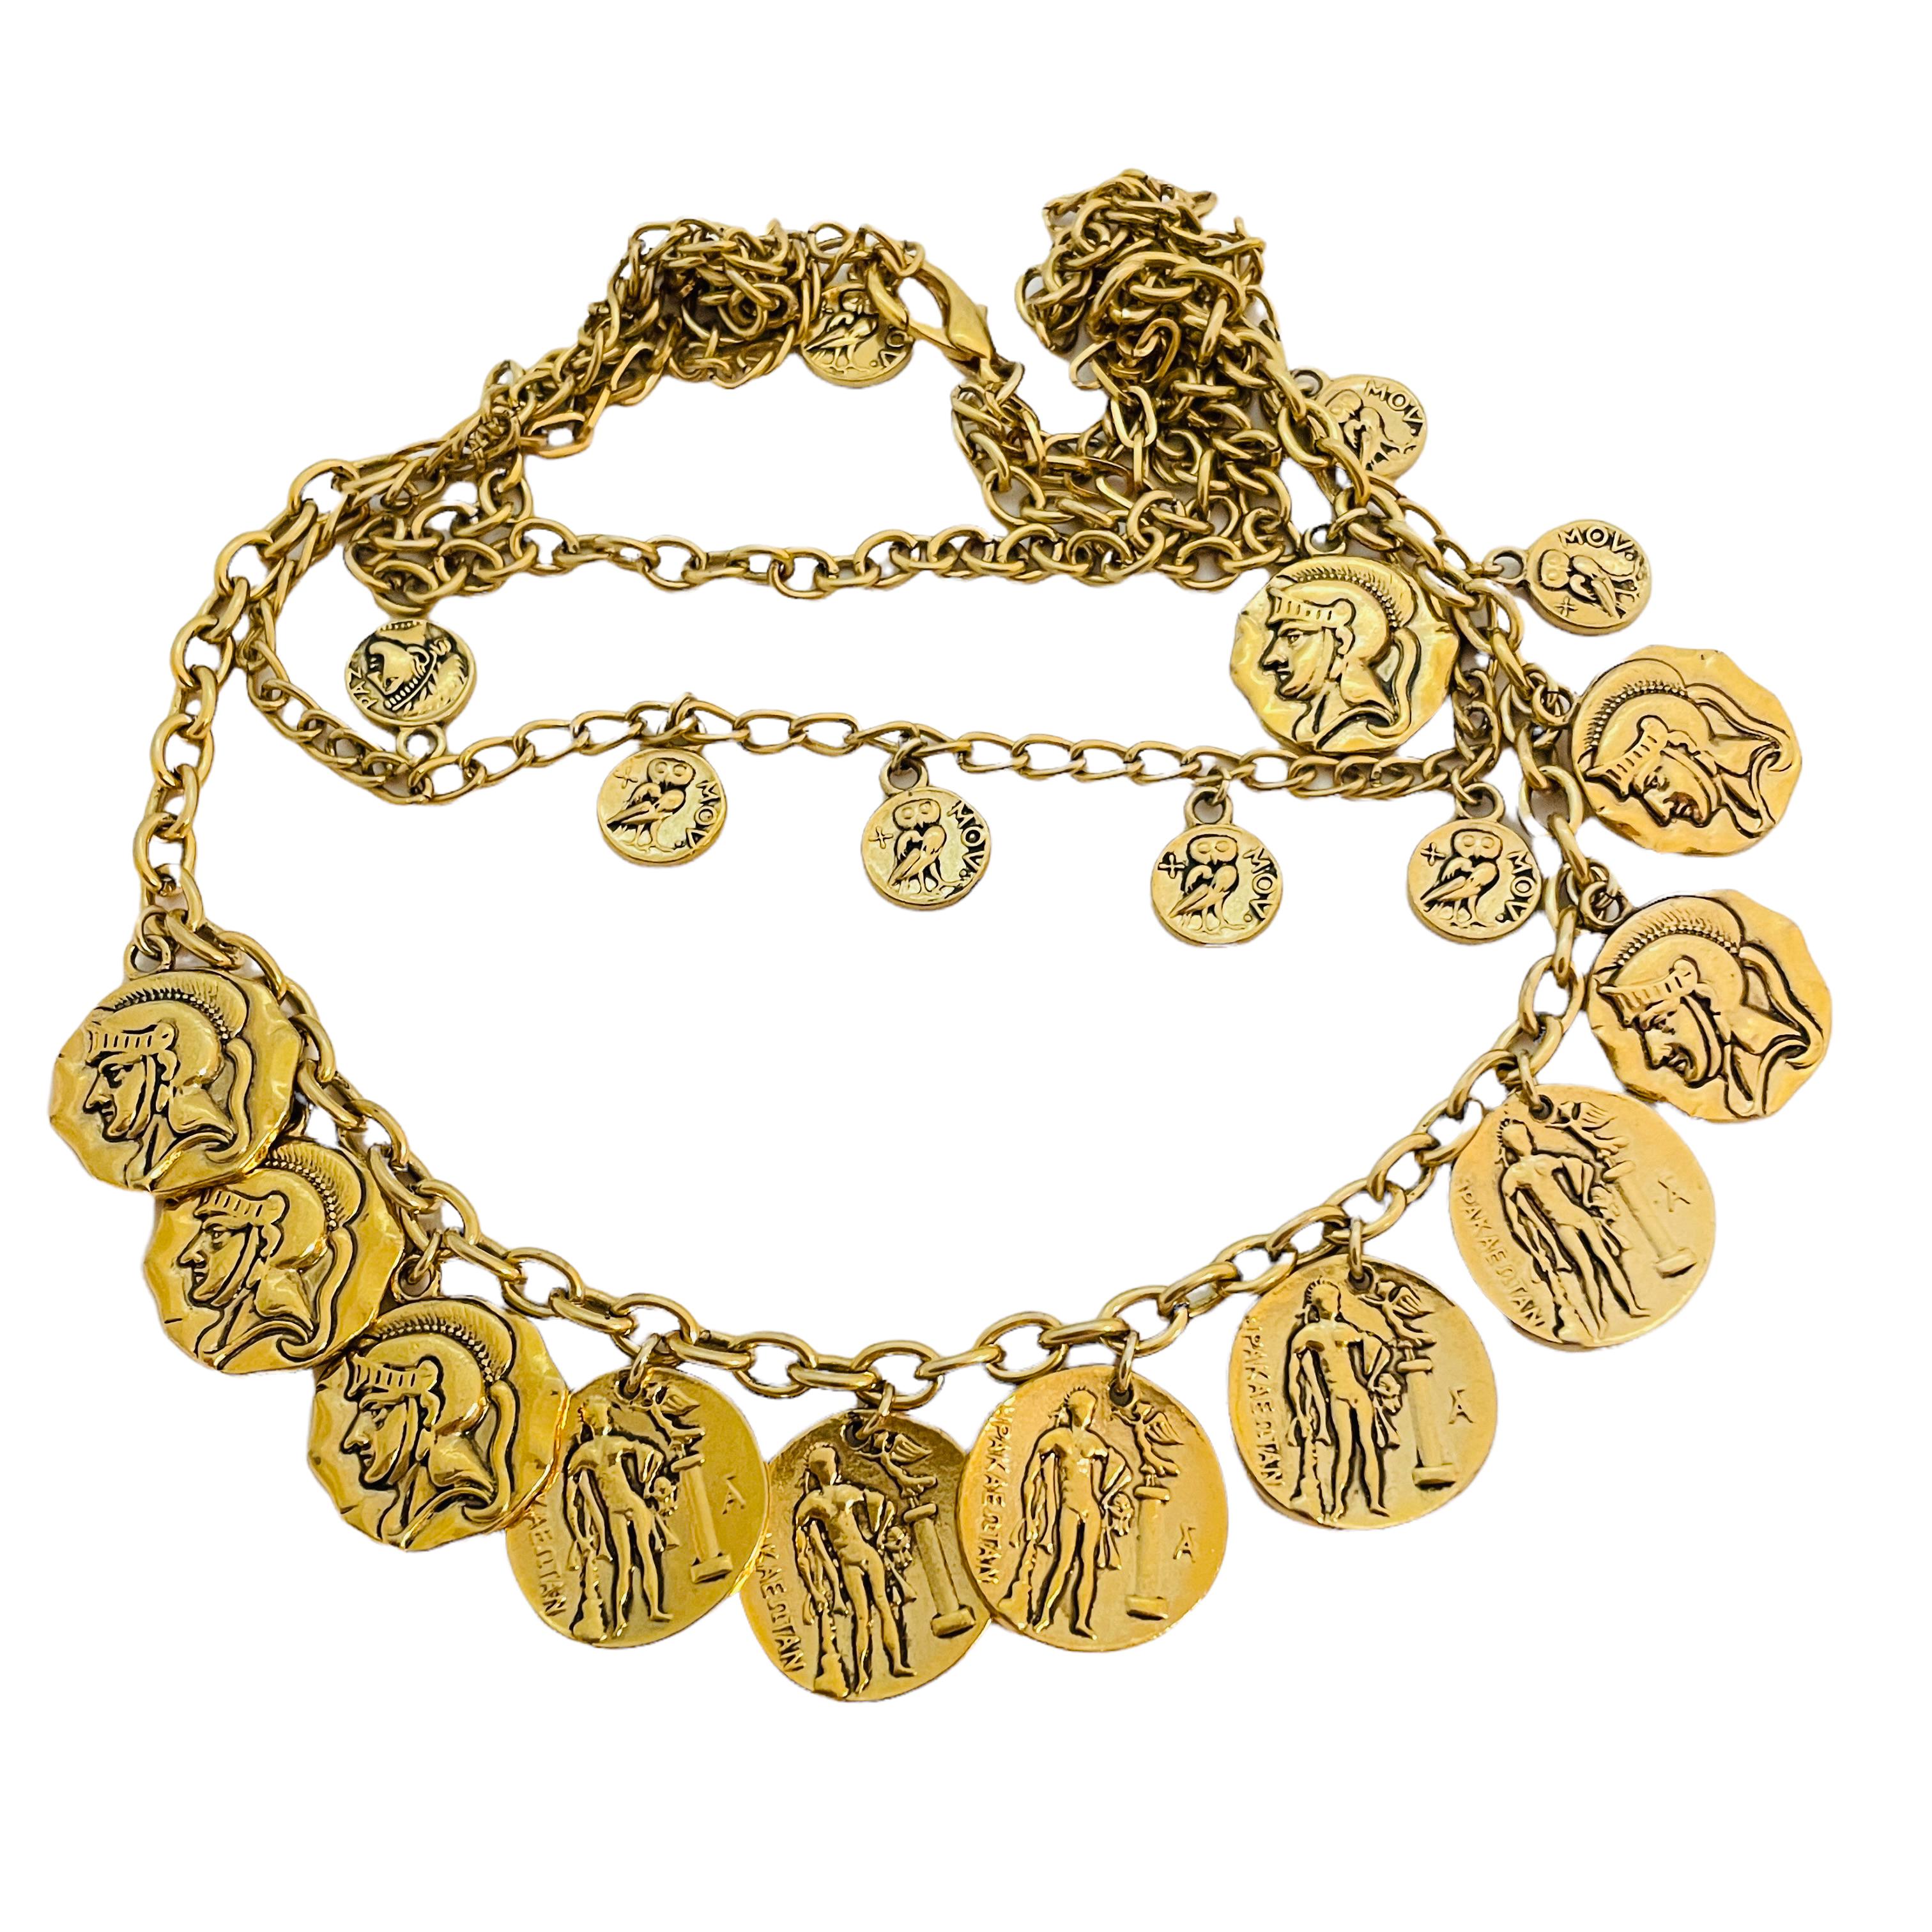 Vtg gold coin charm chain necklace designer runway In Excellent Condition For Sale In Palos Hills, IL